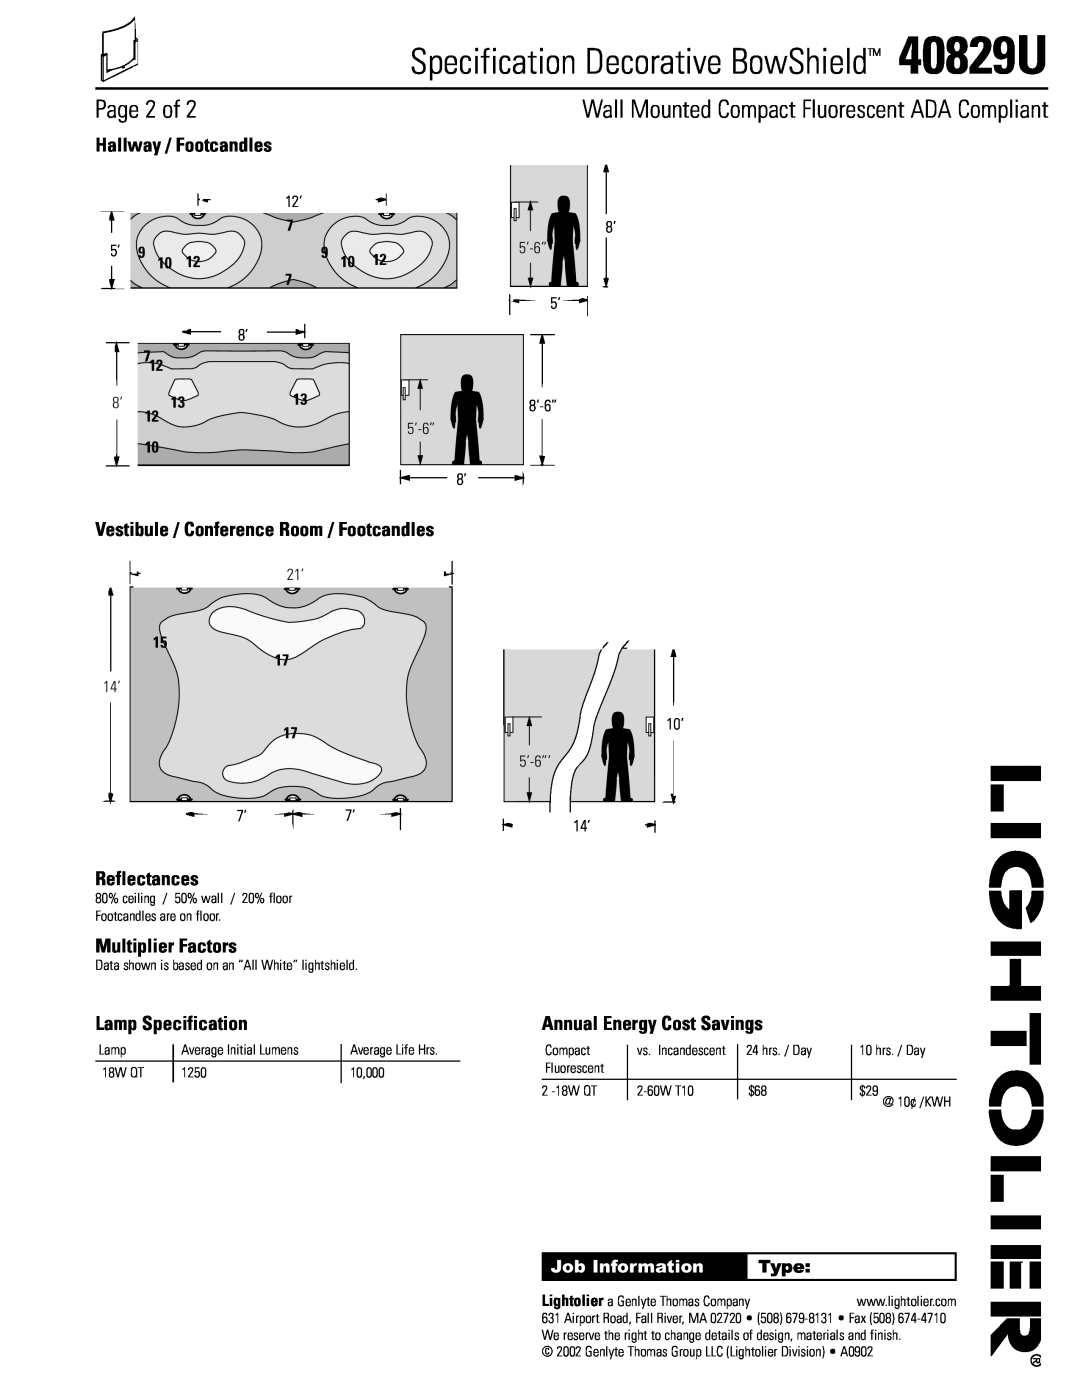 Lightolier Page 2 of, Specification Decorative BowShield 40829U, Wall Mounted Compact Fluorescent ADA Compliant, Type 